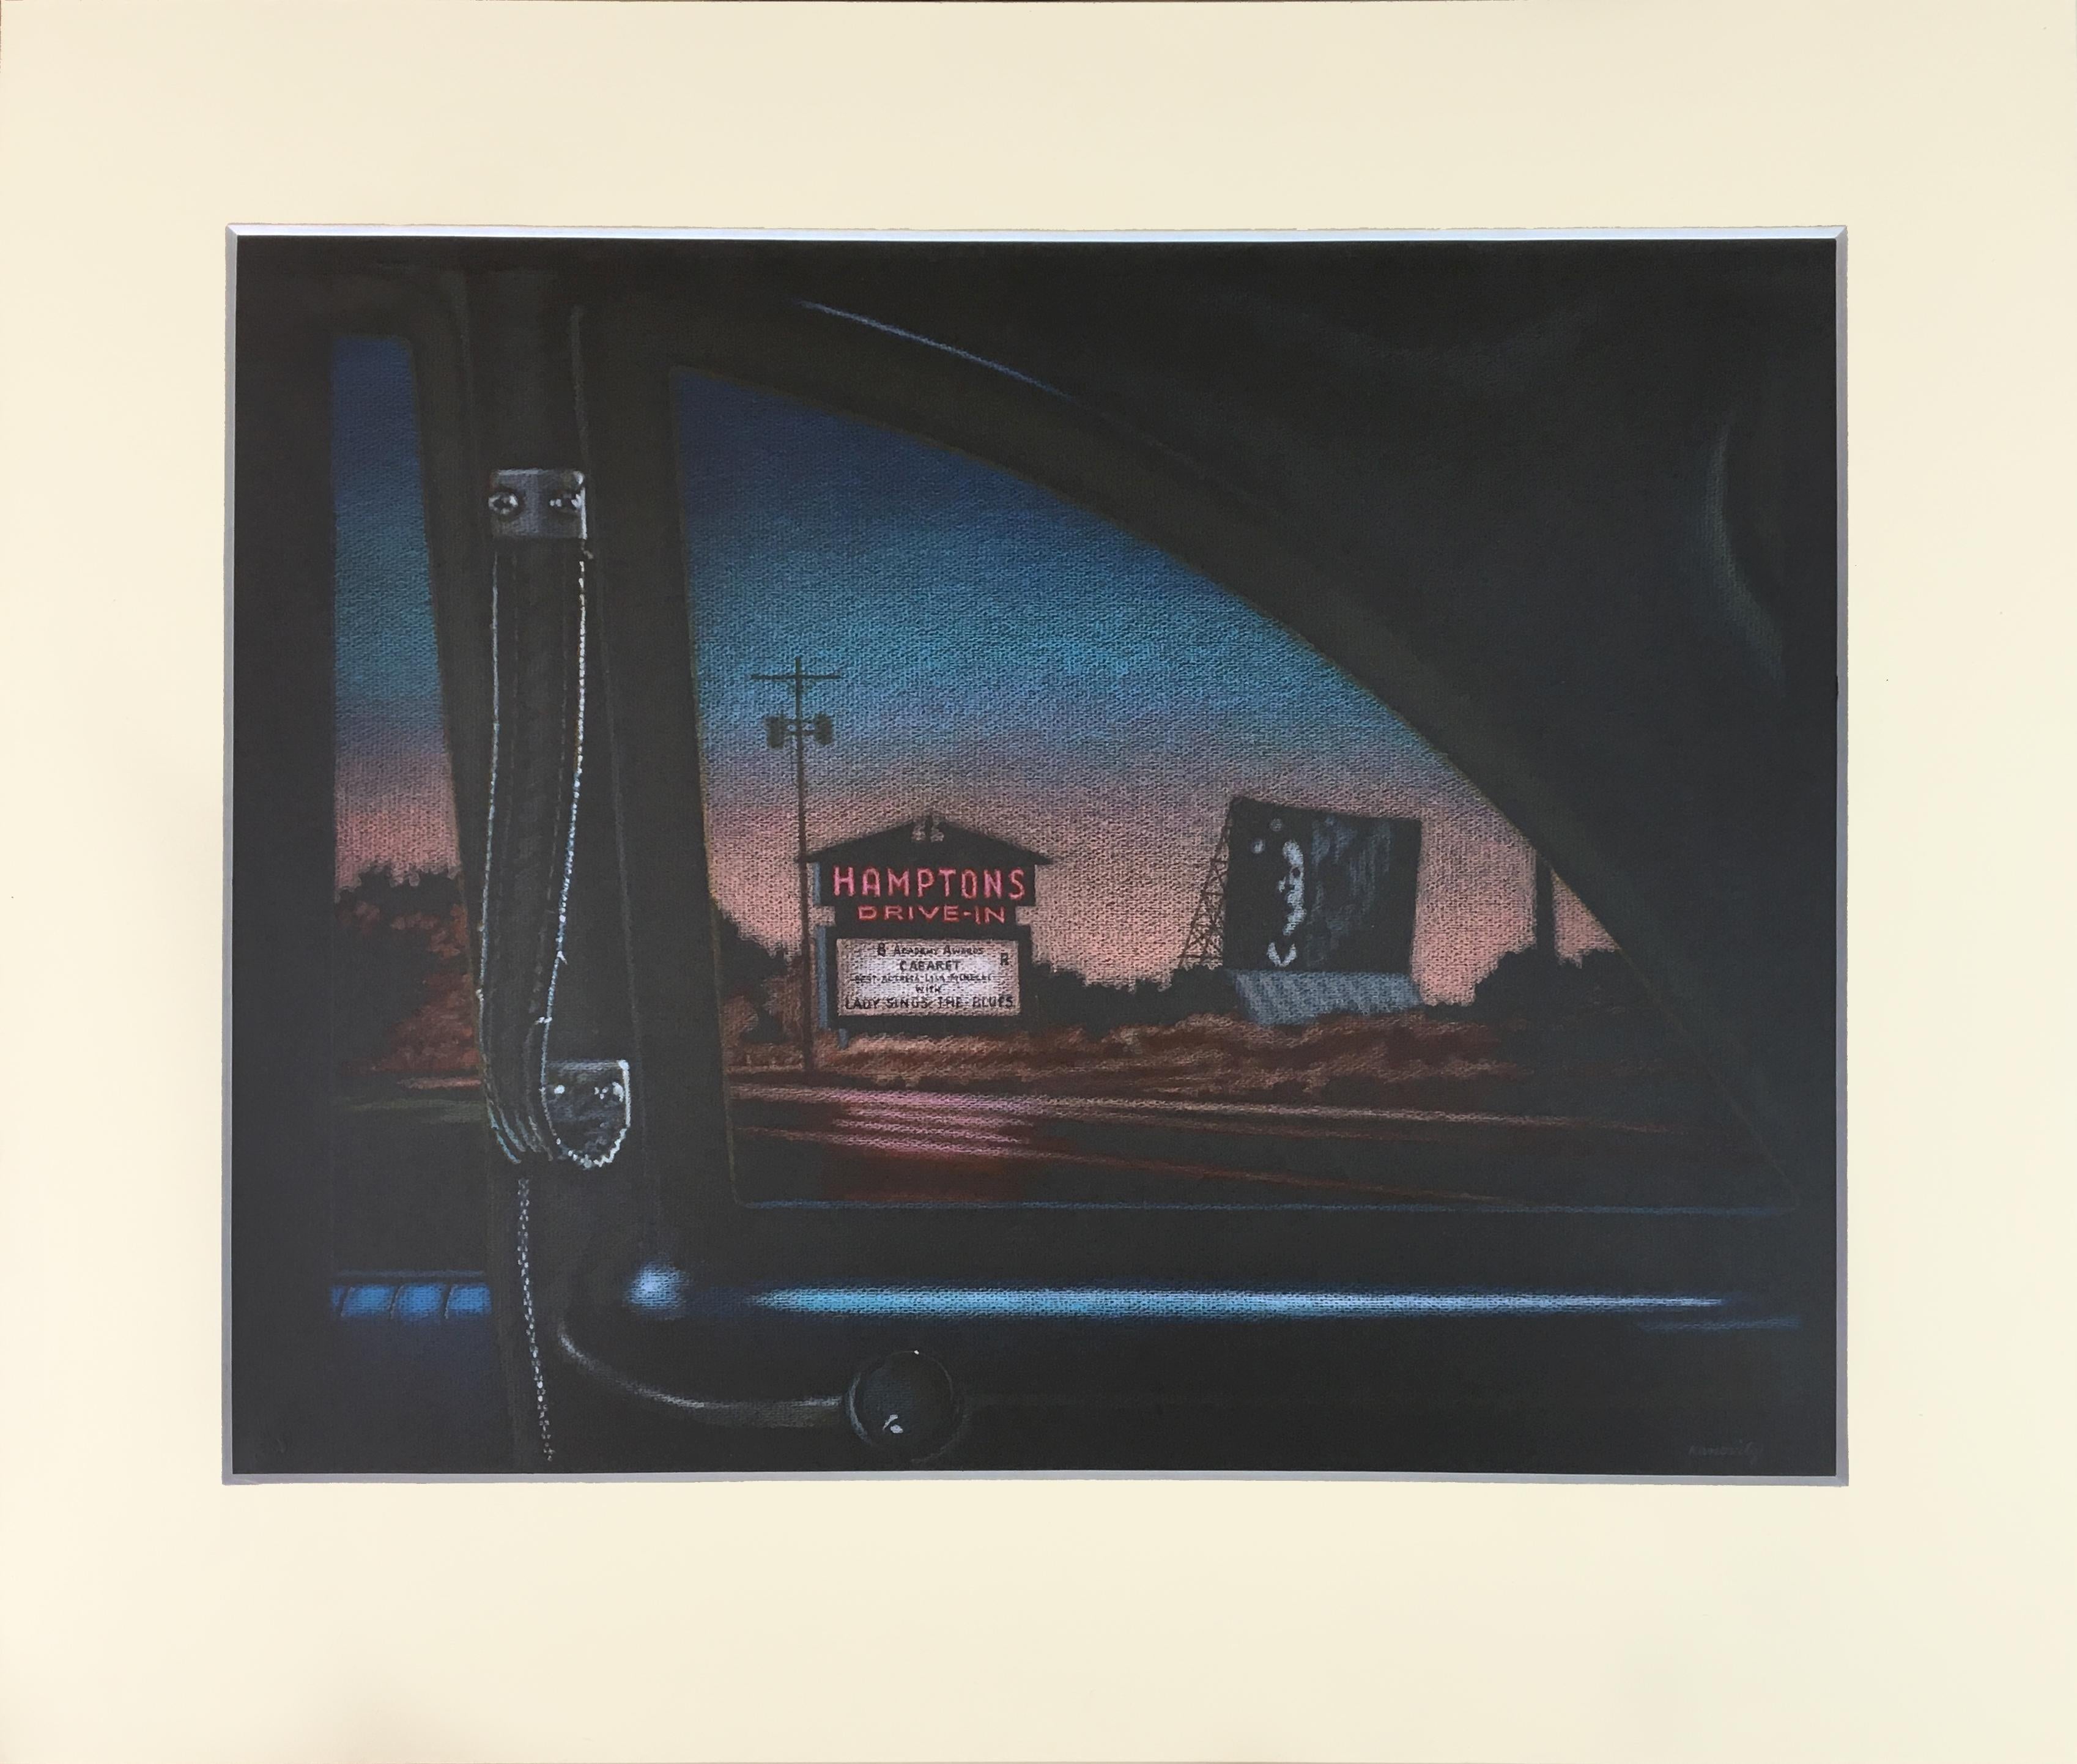 Hamptons Drive In: night cityscape with neon and sunset - Black Landscape Print by Howard Kanovitz